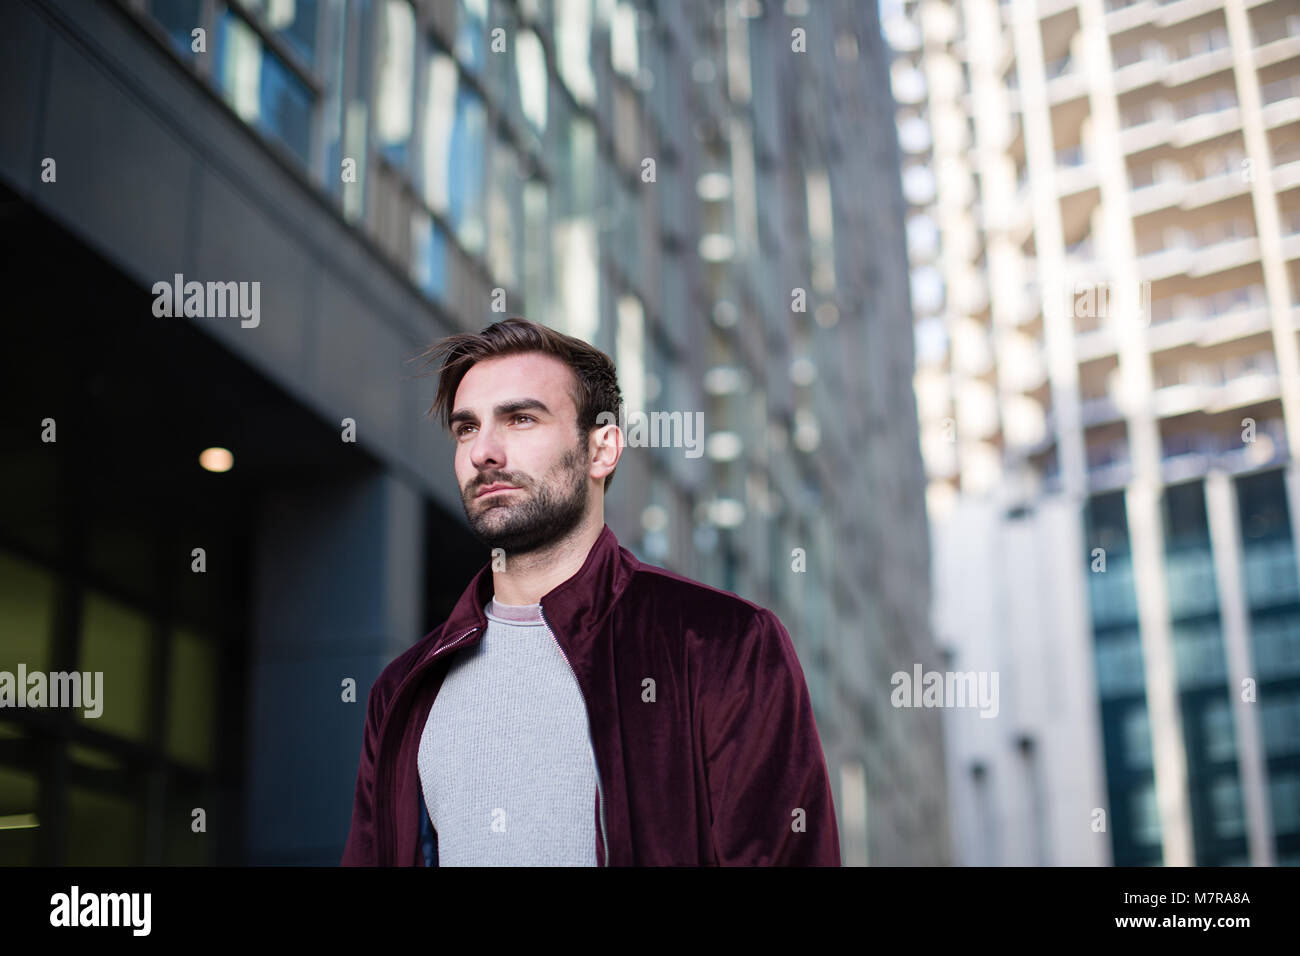 Young adult male walking in city Stock Photo